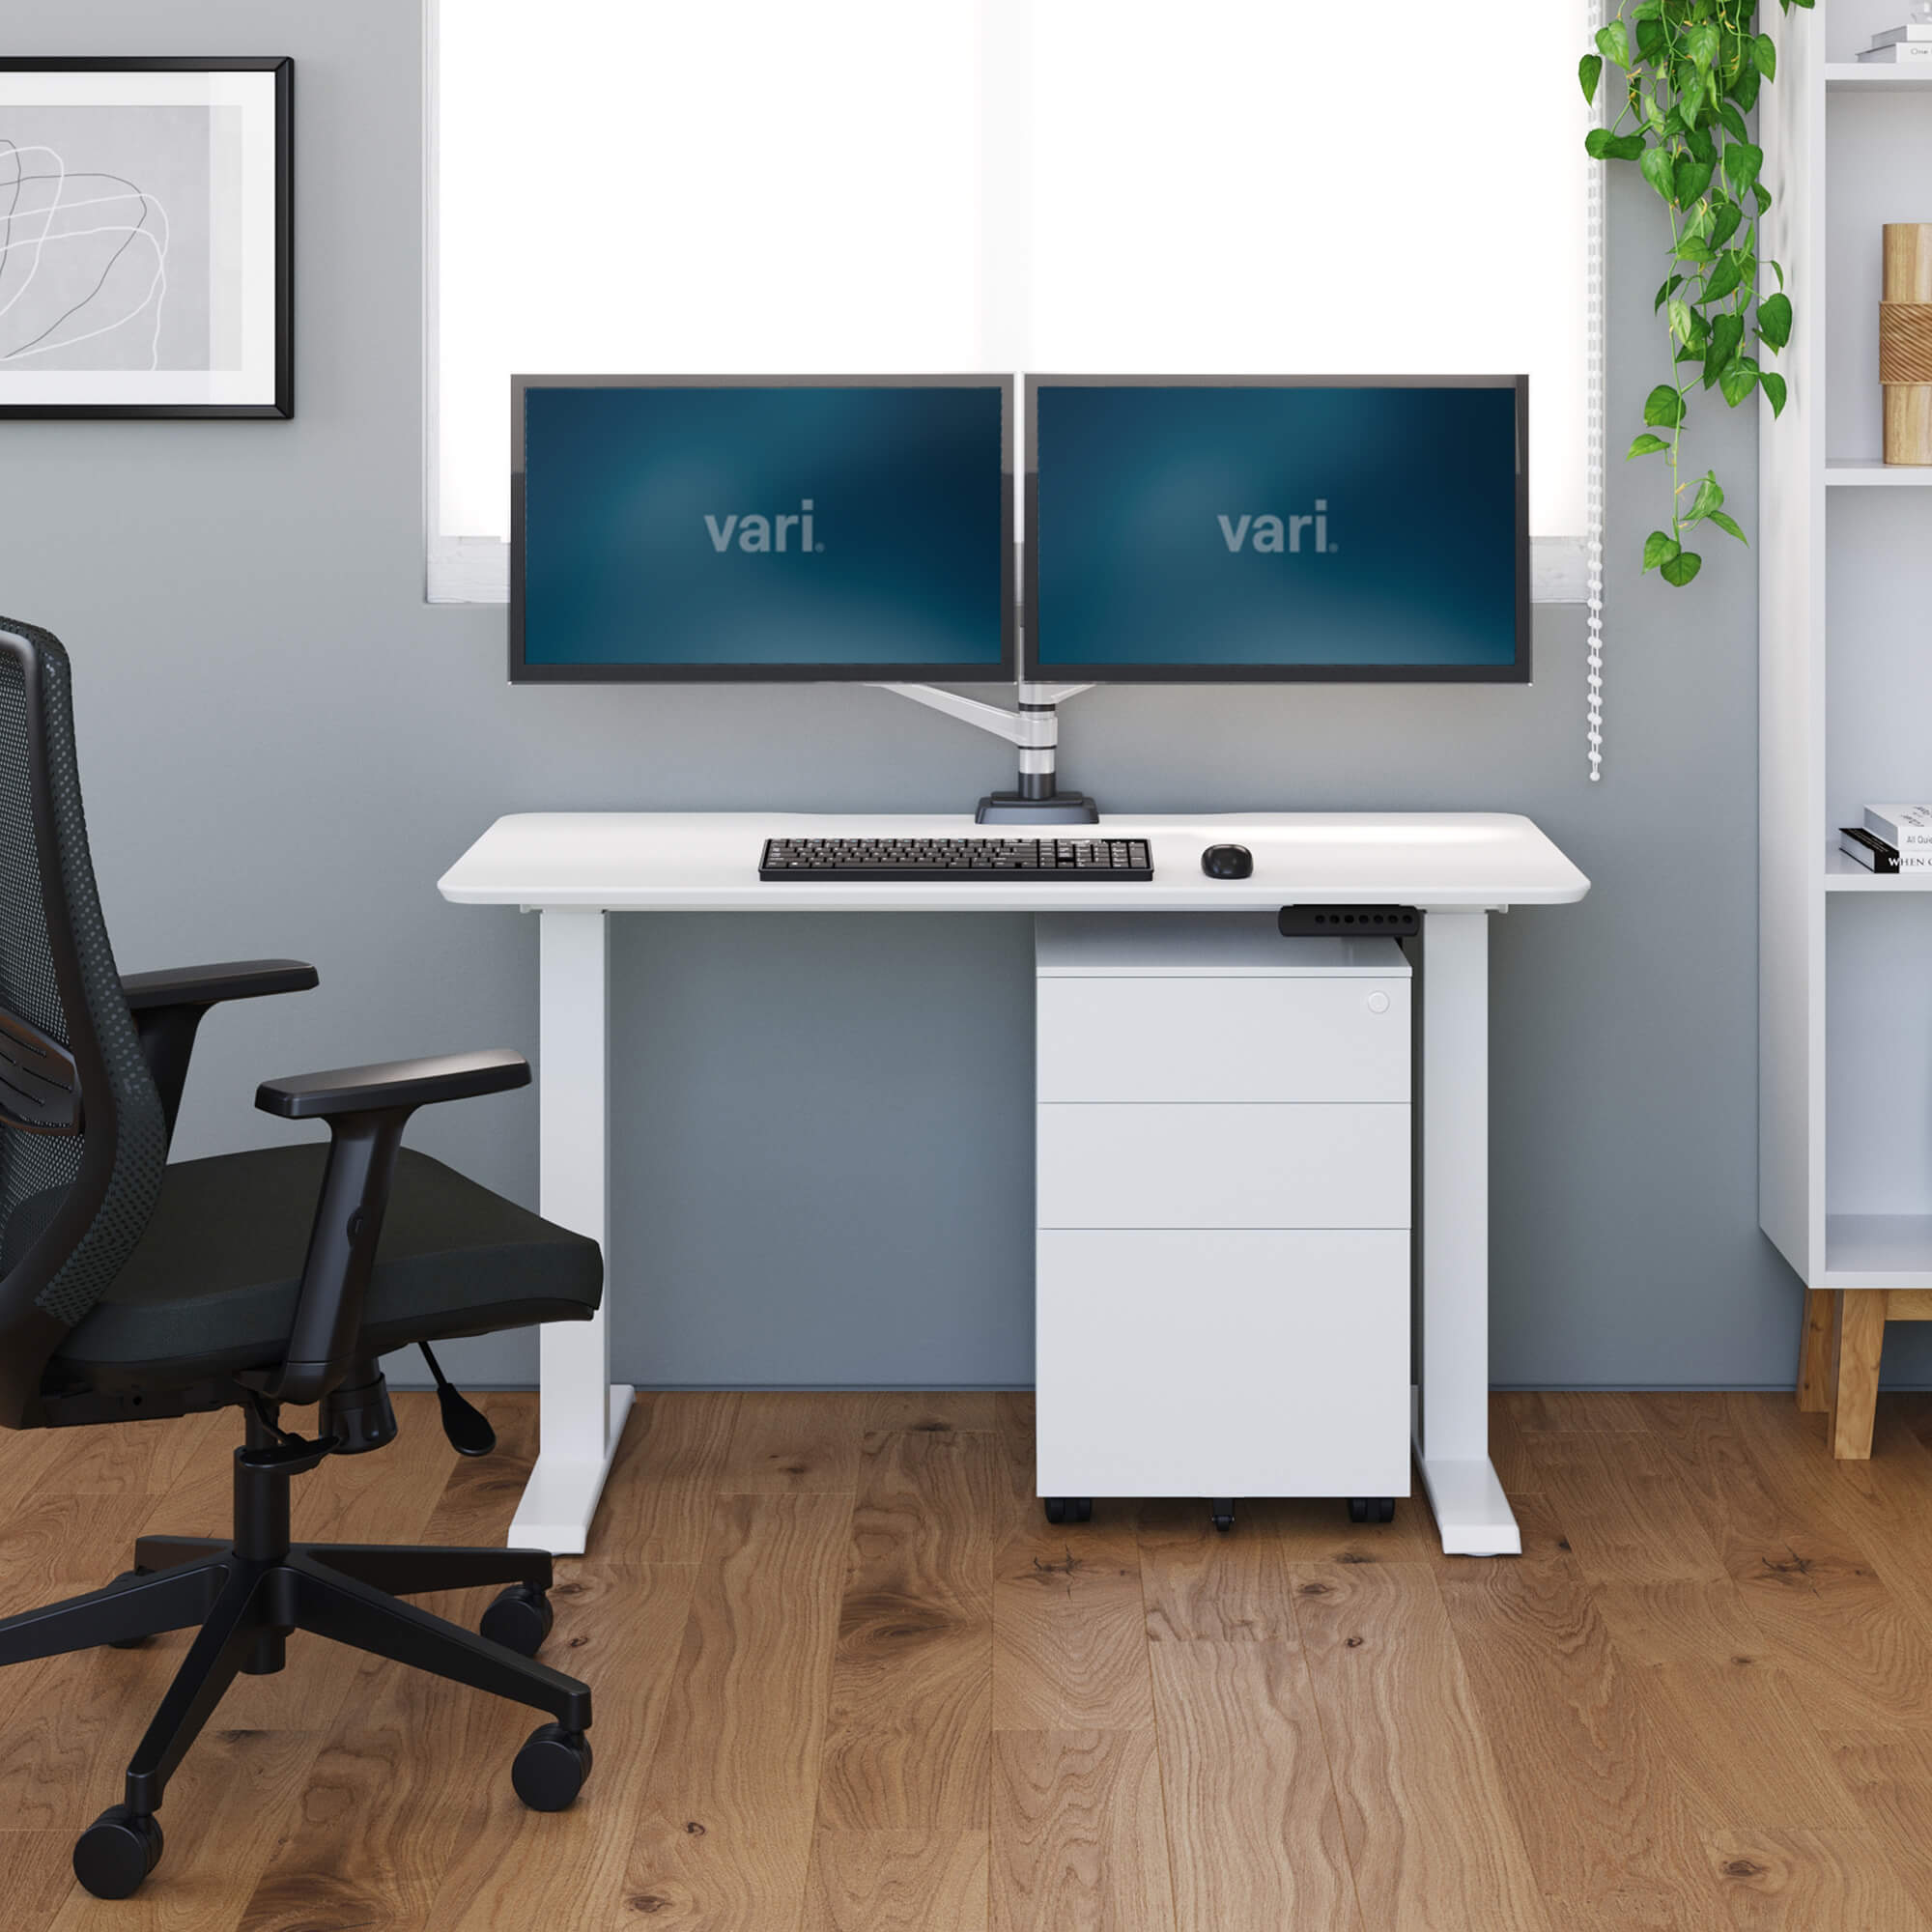 3 Work from Home Setup Essentials: Upgrades for Comfort and